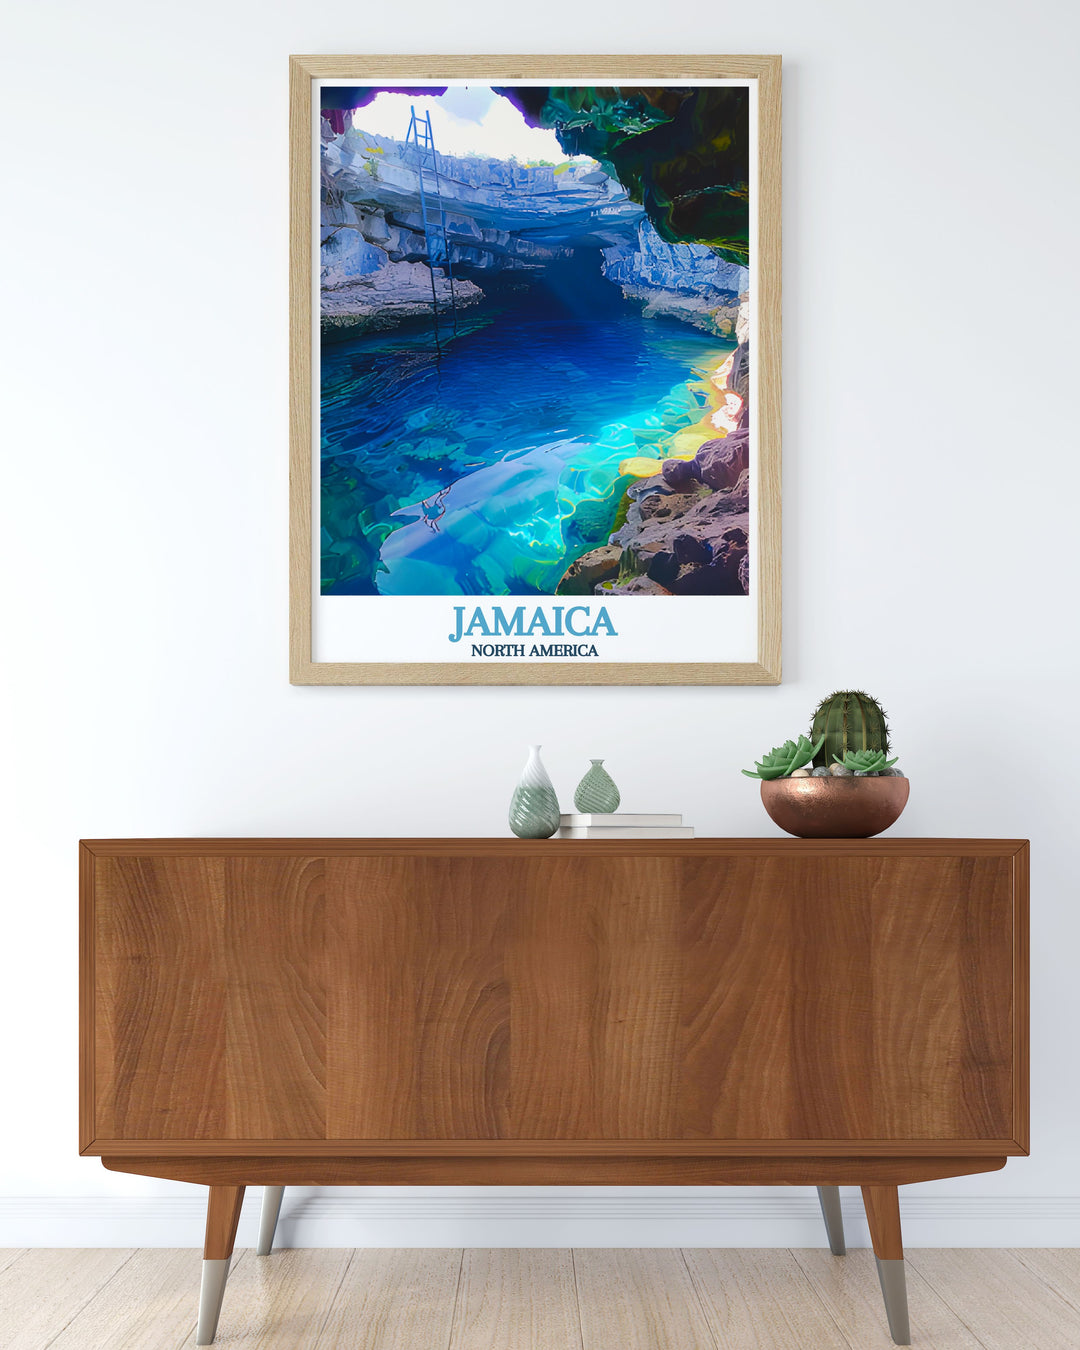 This poster showcases the stunning Blue Hole Mineral Spring in Jamaica, offering a glimpse into the islands natural beauty and serene landscapes.